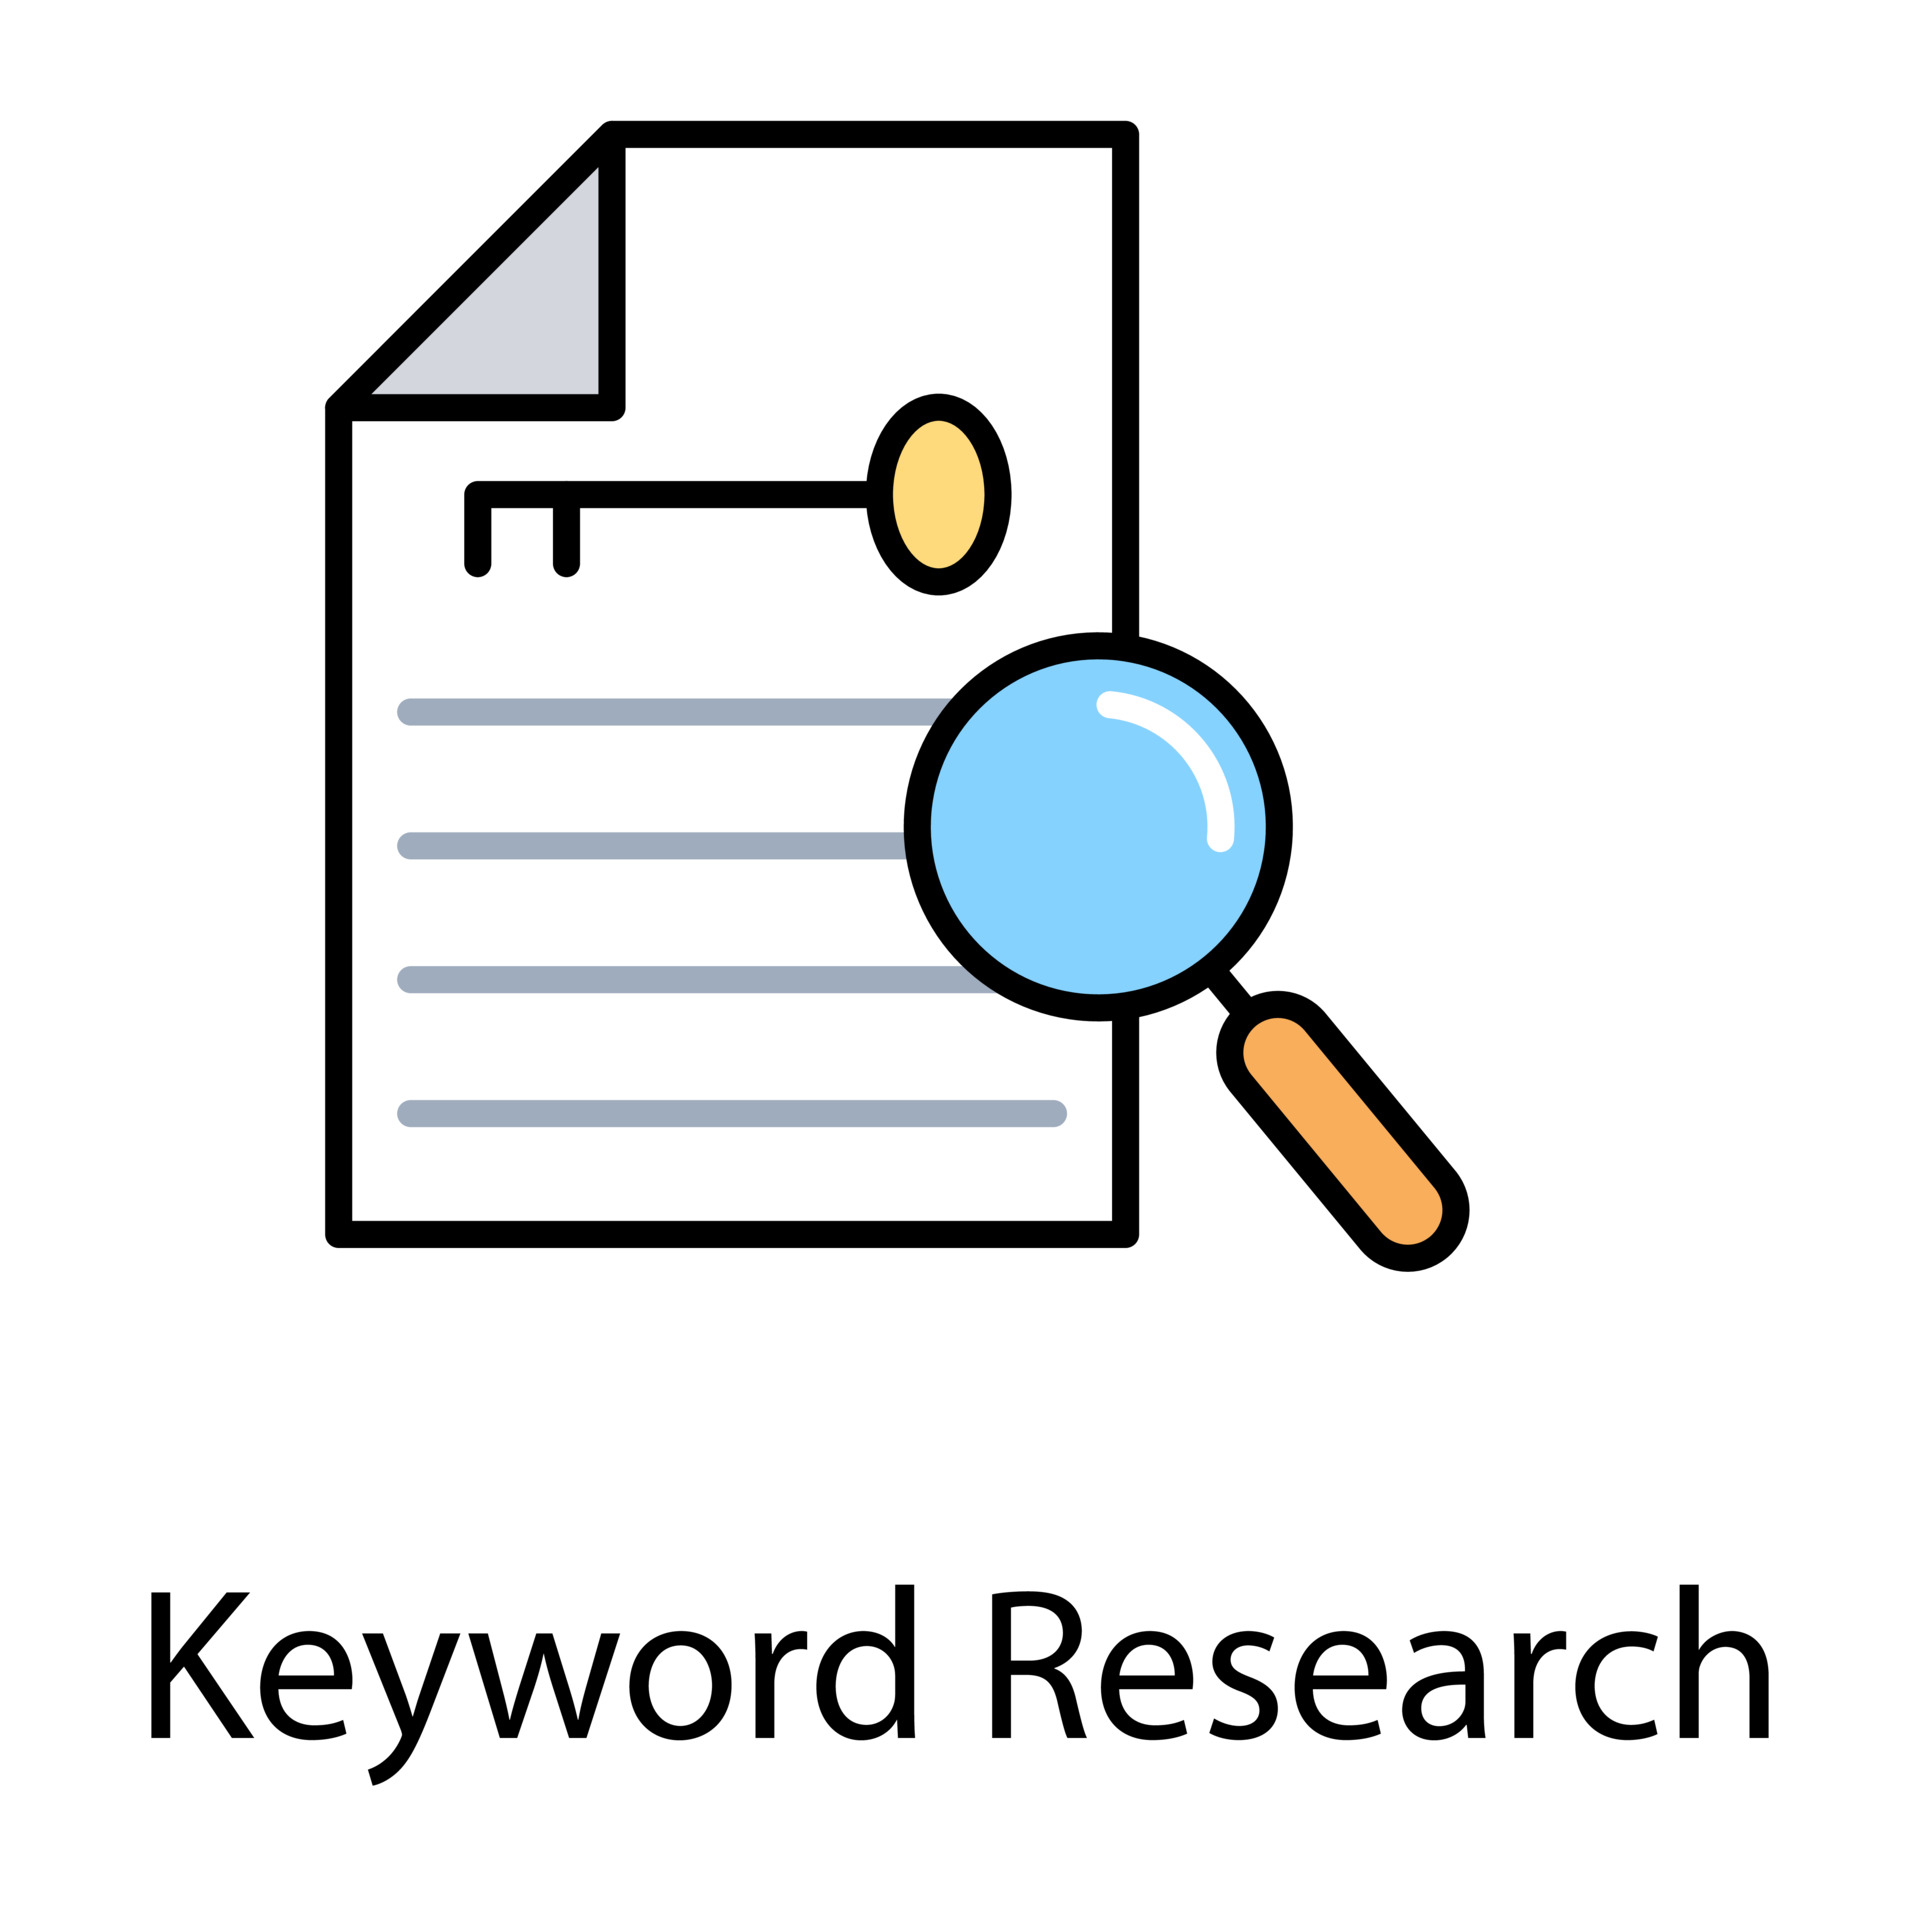 We are the best SEO company in Kenya offering Keyword Research services